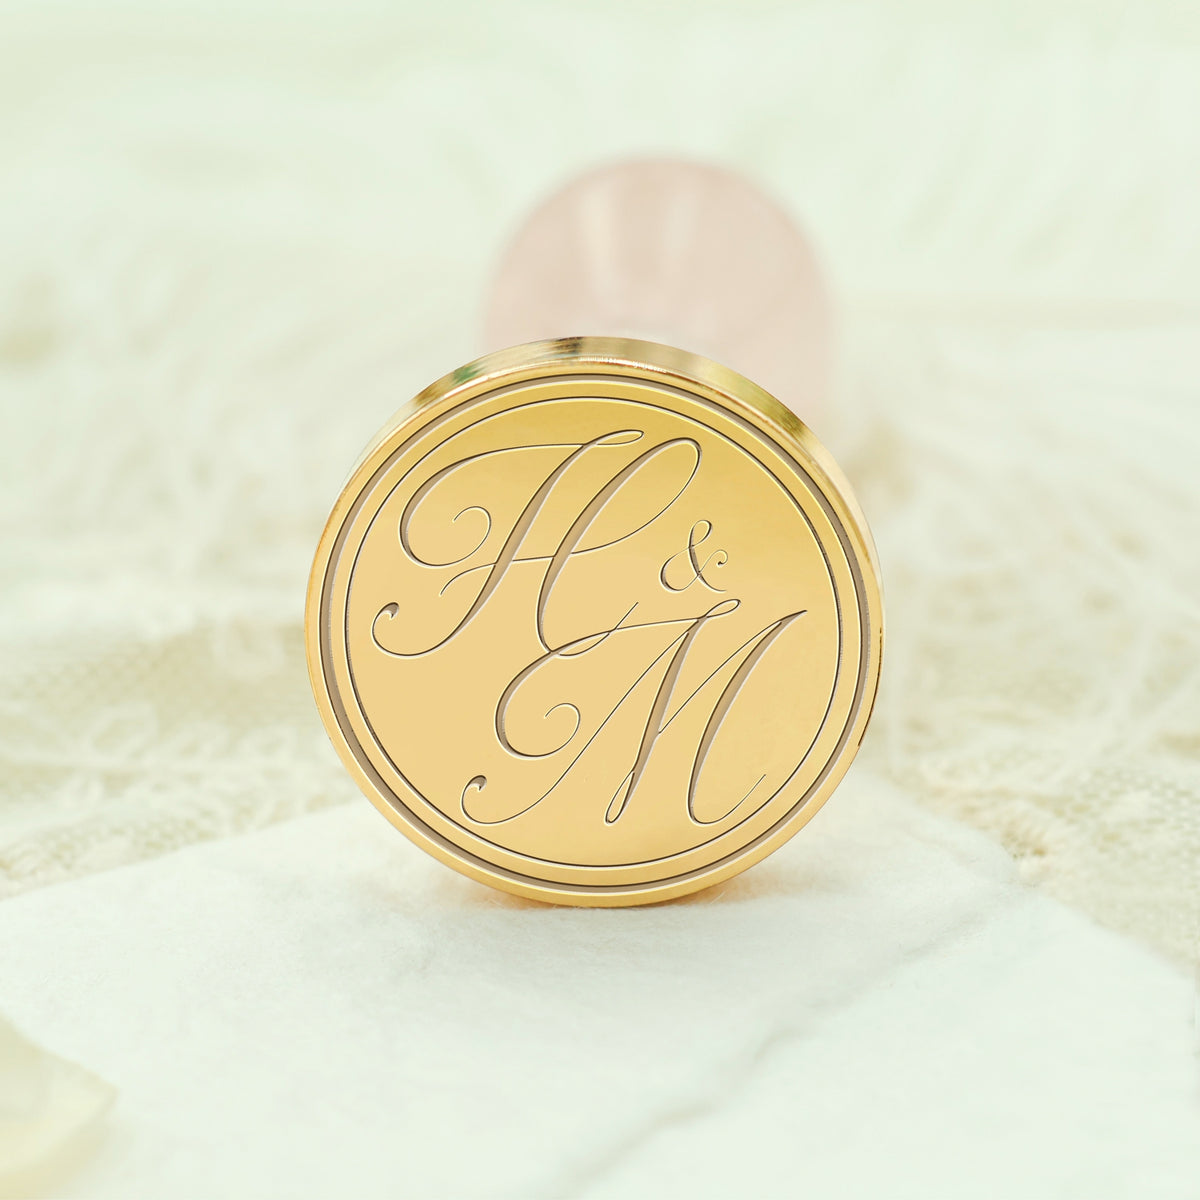 Branches & Buds Double Initials Wedding Custom Self-Adhesive Wax Seal  Stickers - Personalized Elegance for Invitations, Favors, and More